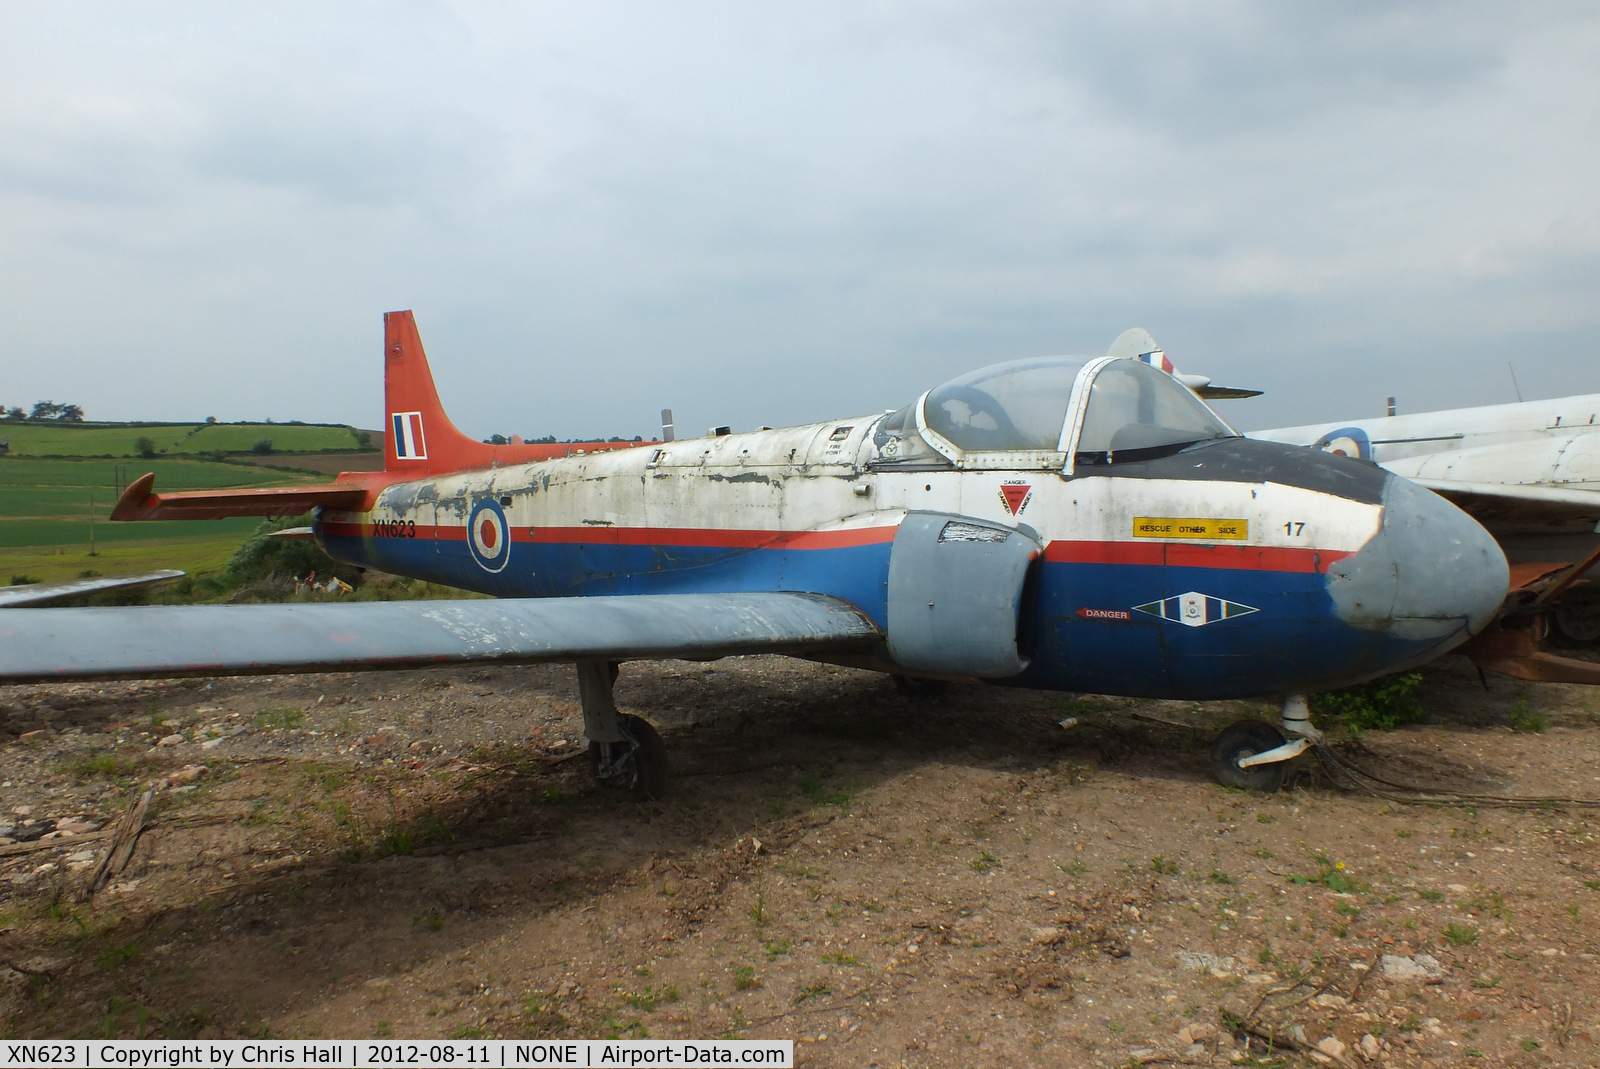 XN623, 1961 Hunting P-84 Jet Provost T.3 C/N PAC/W/13896, part of a private collection on a farm in Pershore, Worcestershire